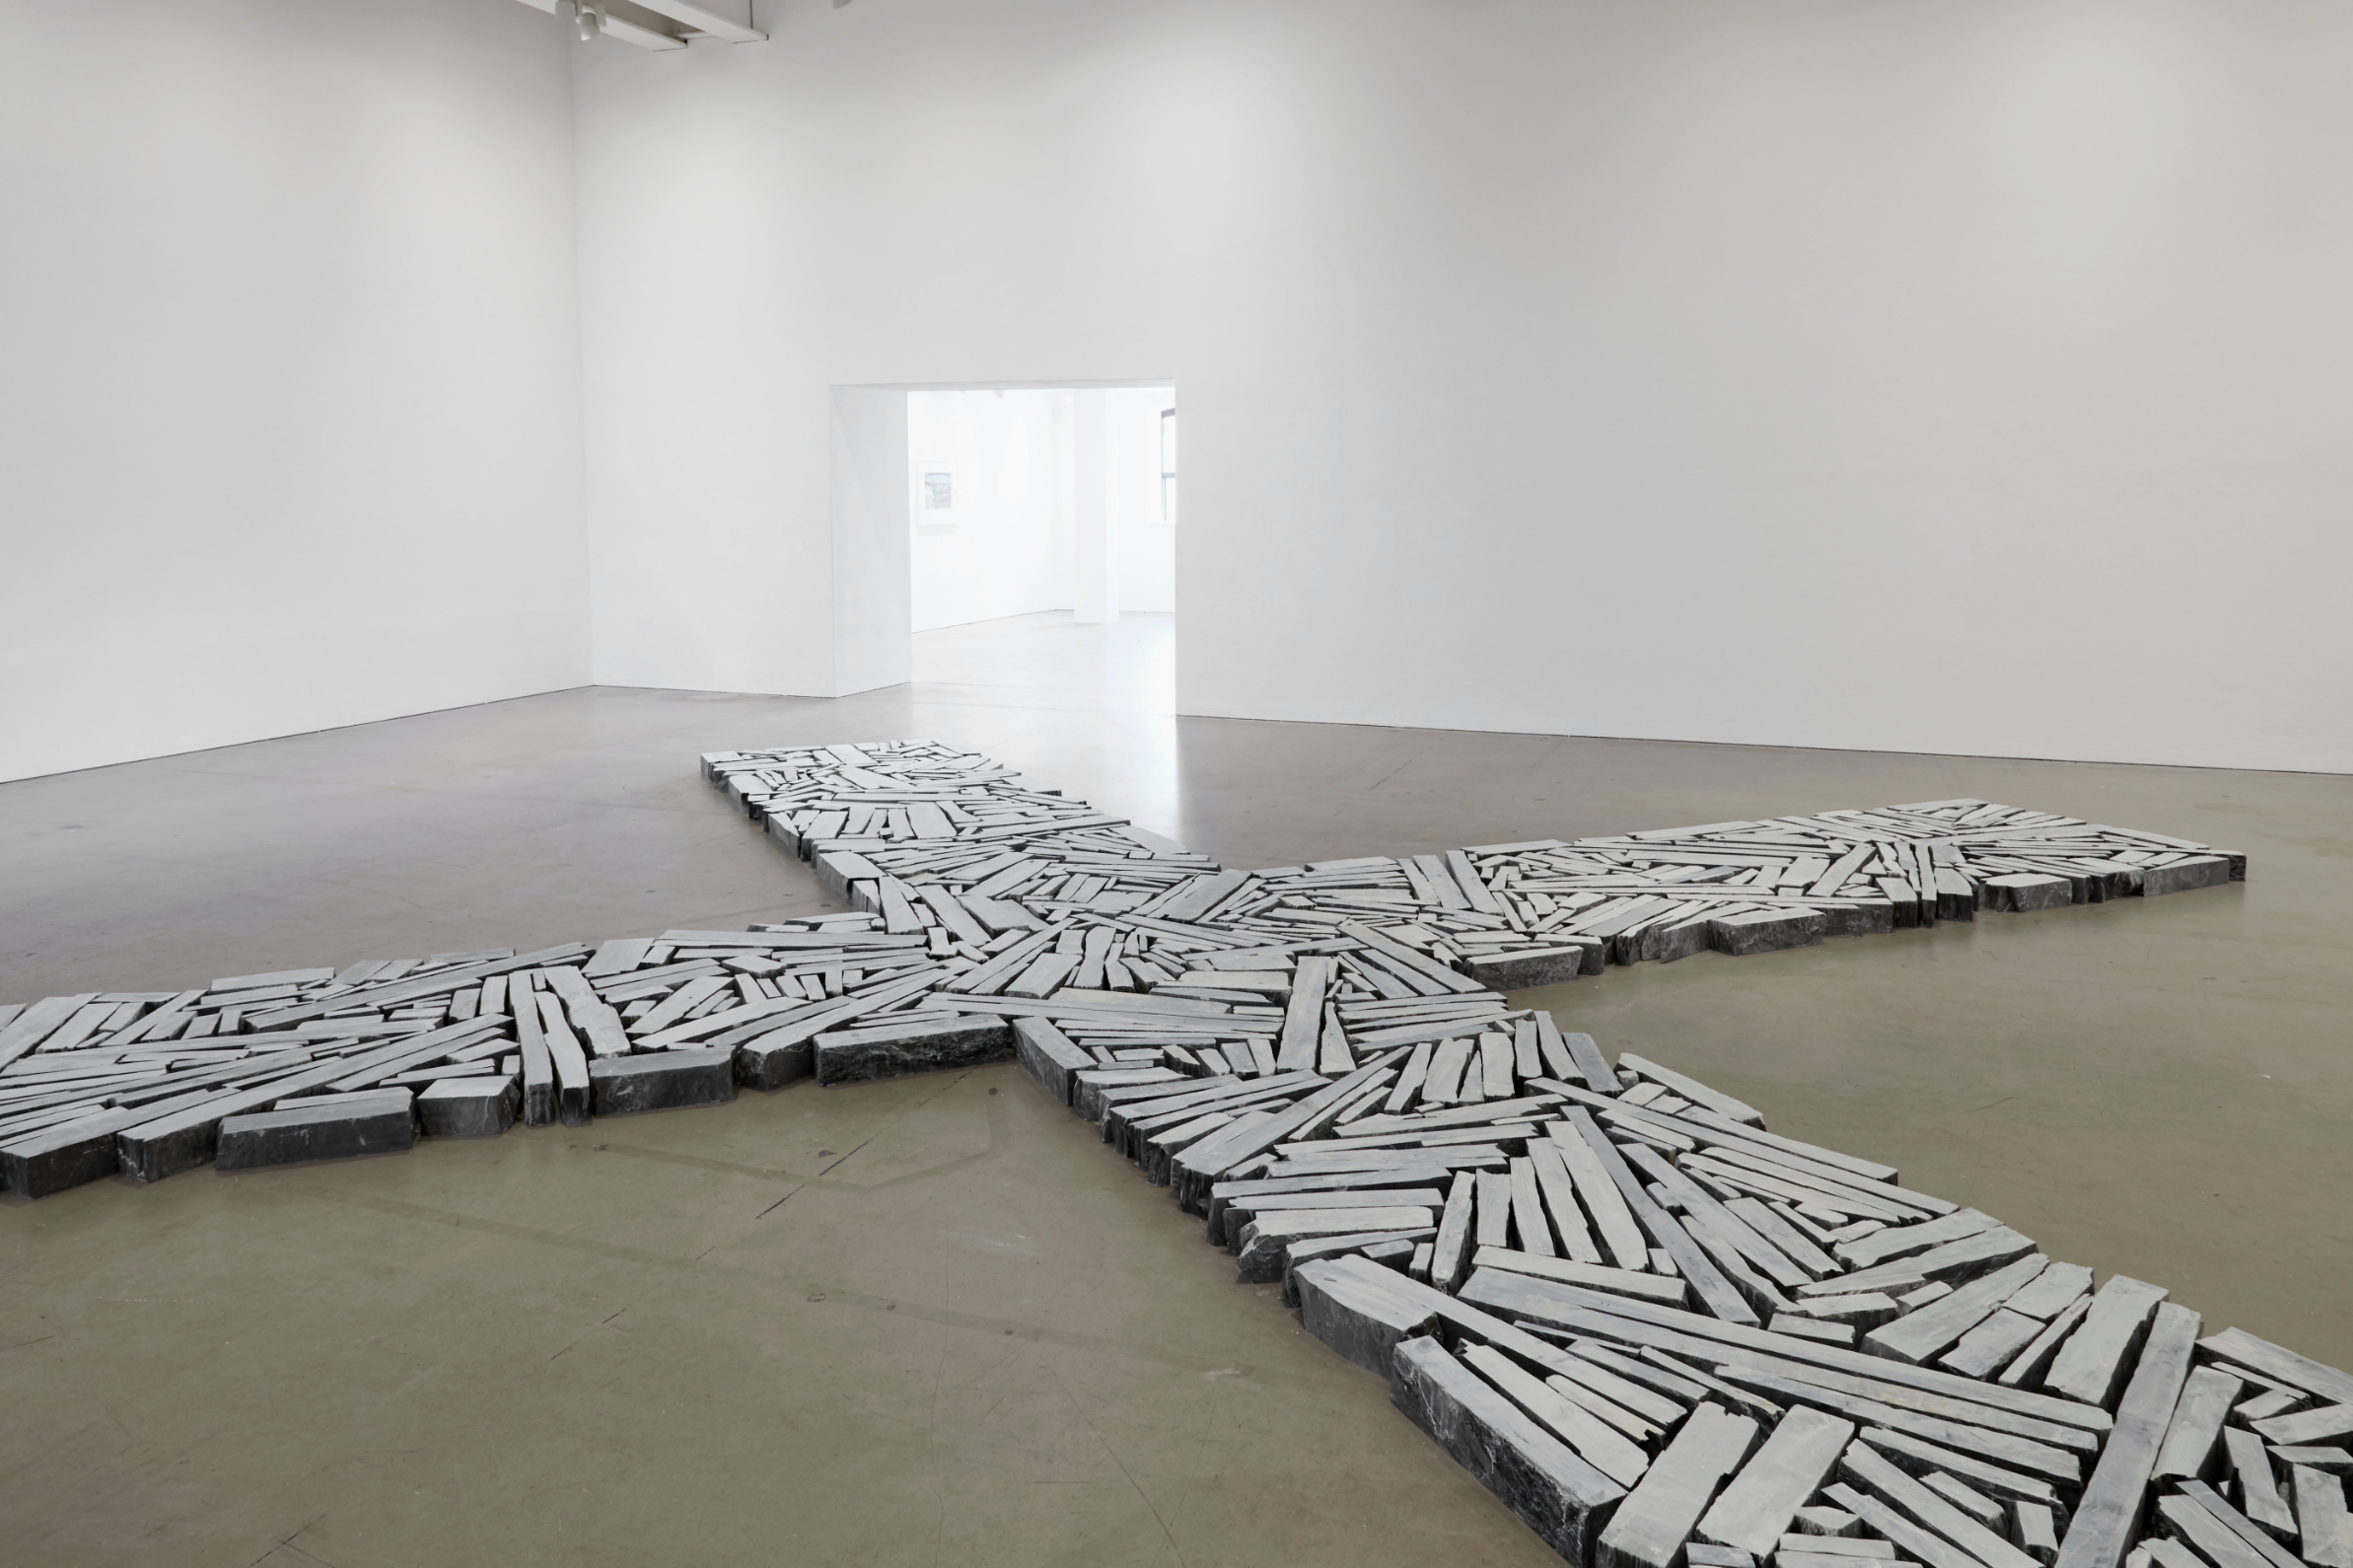 An art installation by Richard Long in a gallery setting